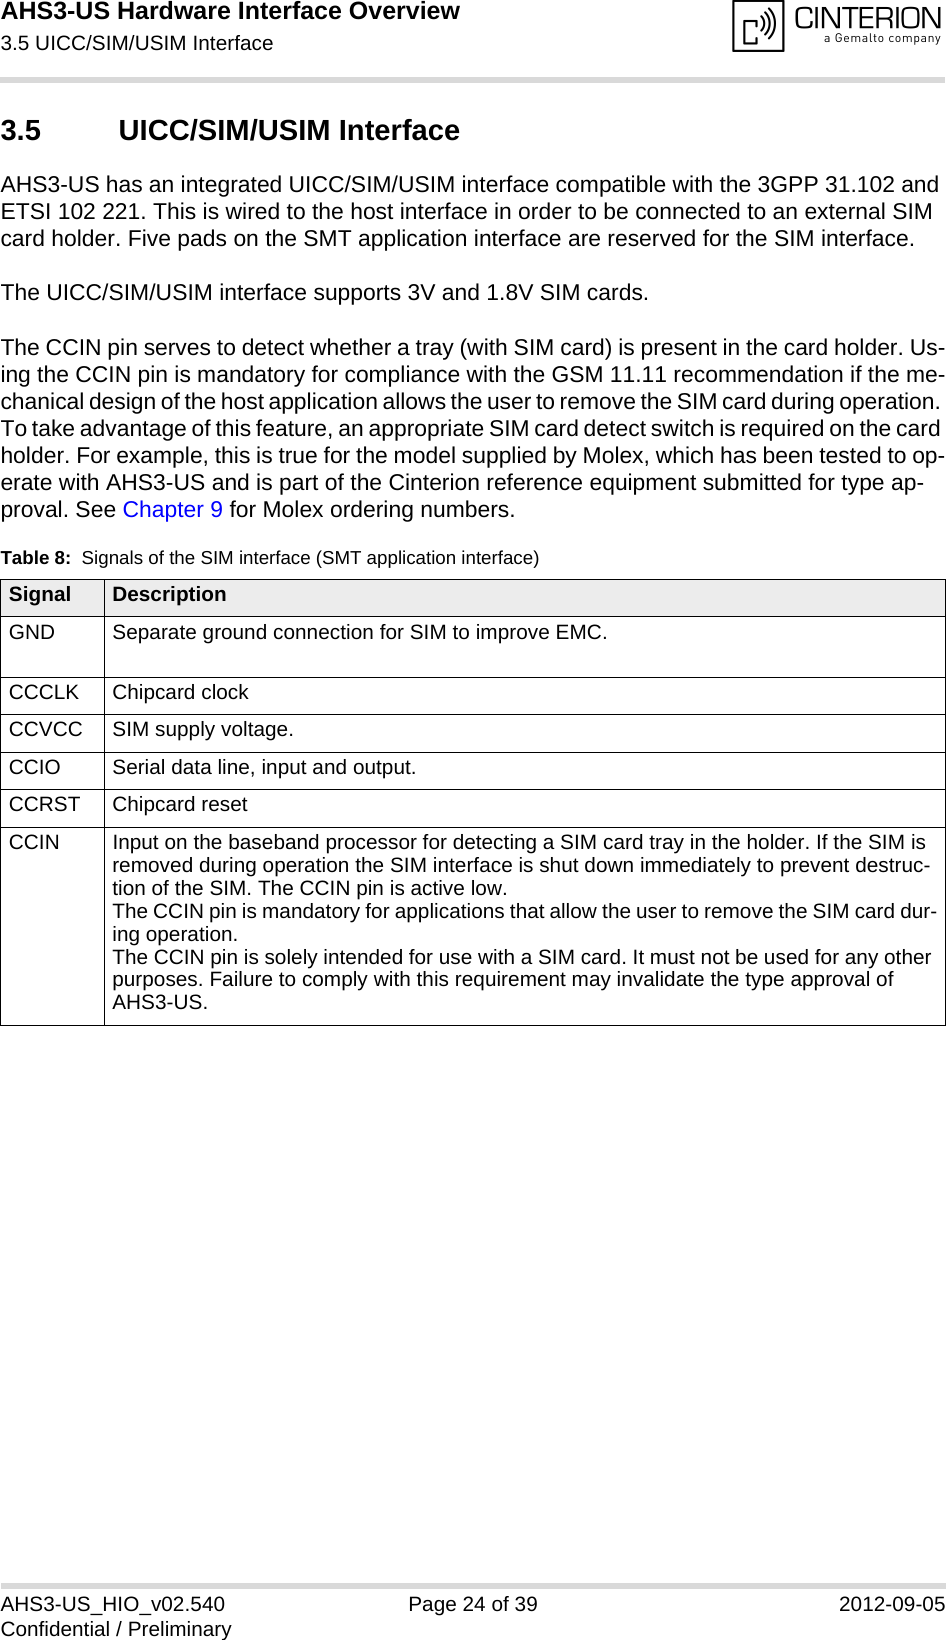 AHS3-US Hardware Interface Overview3.5 UICC/SIM/USIM Interface27AHS3-US_HIO_v02.540 Page 24 of 39 2012-09-05Confidential / Preliminary3.5 UICC/SIM/USIM InterfaceAHS3-US has an integrated UICC/SIM/USIM interface compatible with the 3GPP 31.102 and ETSI 102 221. This is wired to the host interface in order to be connected to an external SIM card holder. Five pads on the SMT application interface are reserved for the SIM interface. The UICC/SIM/USIM interface supports 3V and 1.8V SIM cards. The CCIN pin serves to detect whether a tray (with SIM card) is present in the card holder. Us-ing the CCIN pin is mandatory for compliance with the GSM 11.11 recommendation if the me-chanical design of the host application allows the user to remove the SIM card during operation. To take advantage of this feature, an appropriate SIM card detect switch is required on the card holder. For example, this is true for the model supplied by Molex, which has been tested to op-erate with AHS3-US and is part of the Cinterion reference equipment submitted for type ap-proval. See Chapter 9 for Molex ordering numbers.Table 8:  Signals of the SIM interface (SMT application interface)Signal DescriptionGND Separate ground connection for SIM to improve EMC.CCCLK Chipcard clockCCVCC SIM supply voltage.CCIO Serial data line, input and output.CCRST Chipcard resetCCIN Input on the baseband processor for detecting a SIM card tray in the holder. If the SIM is removed during operation the SIM interface is shut down immediately to prevent destruc-tion of the SIM. The CCIN pin is active low.The CCIN pin is mandatory for applications that allow the user to remove the SIM card dur-ing operation. The CCIN pin is solely intended for use with a SIM card. It must not be used for any other purposes. Failure to comply with this requirement may invalidate the type approval of AHS3-US.